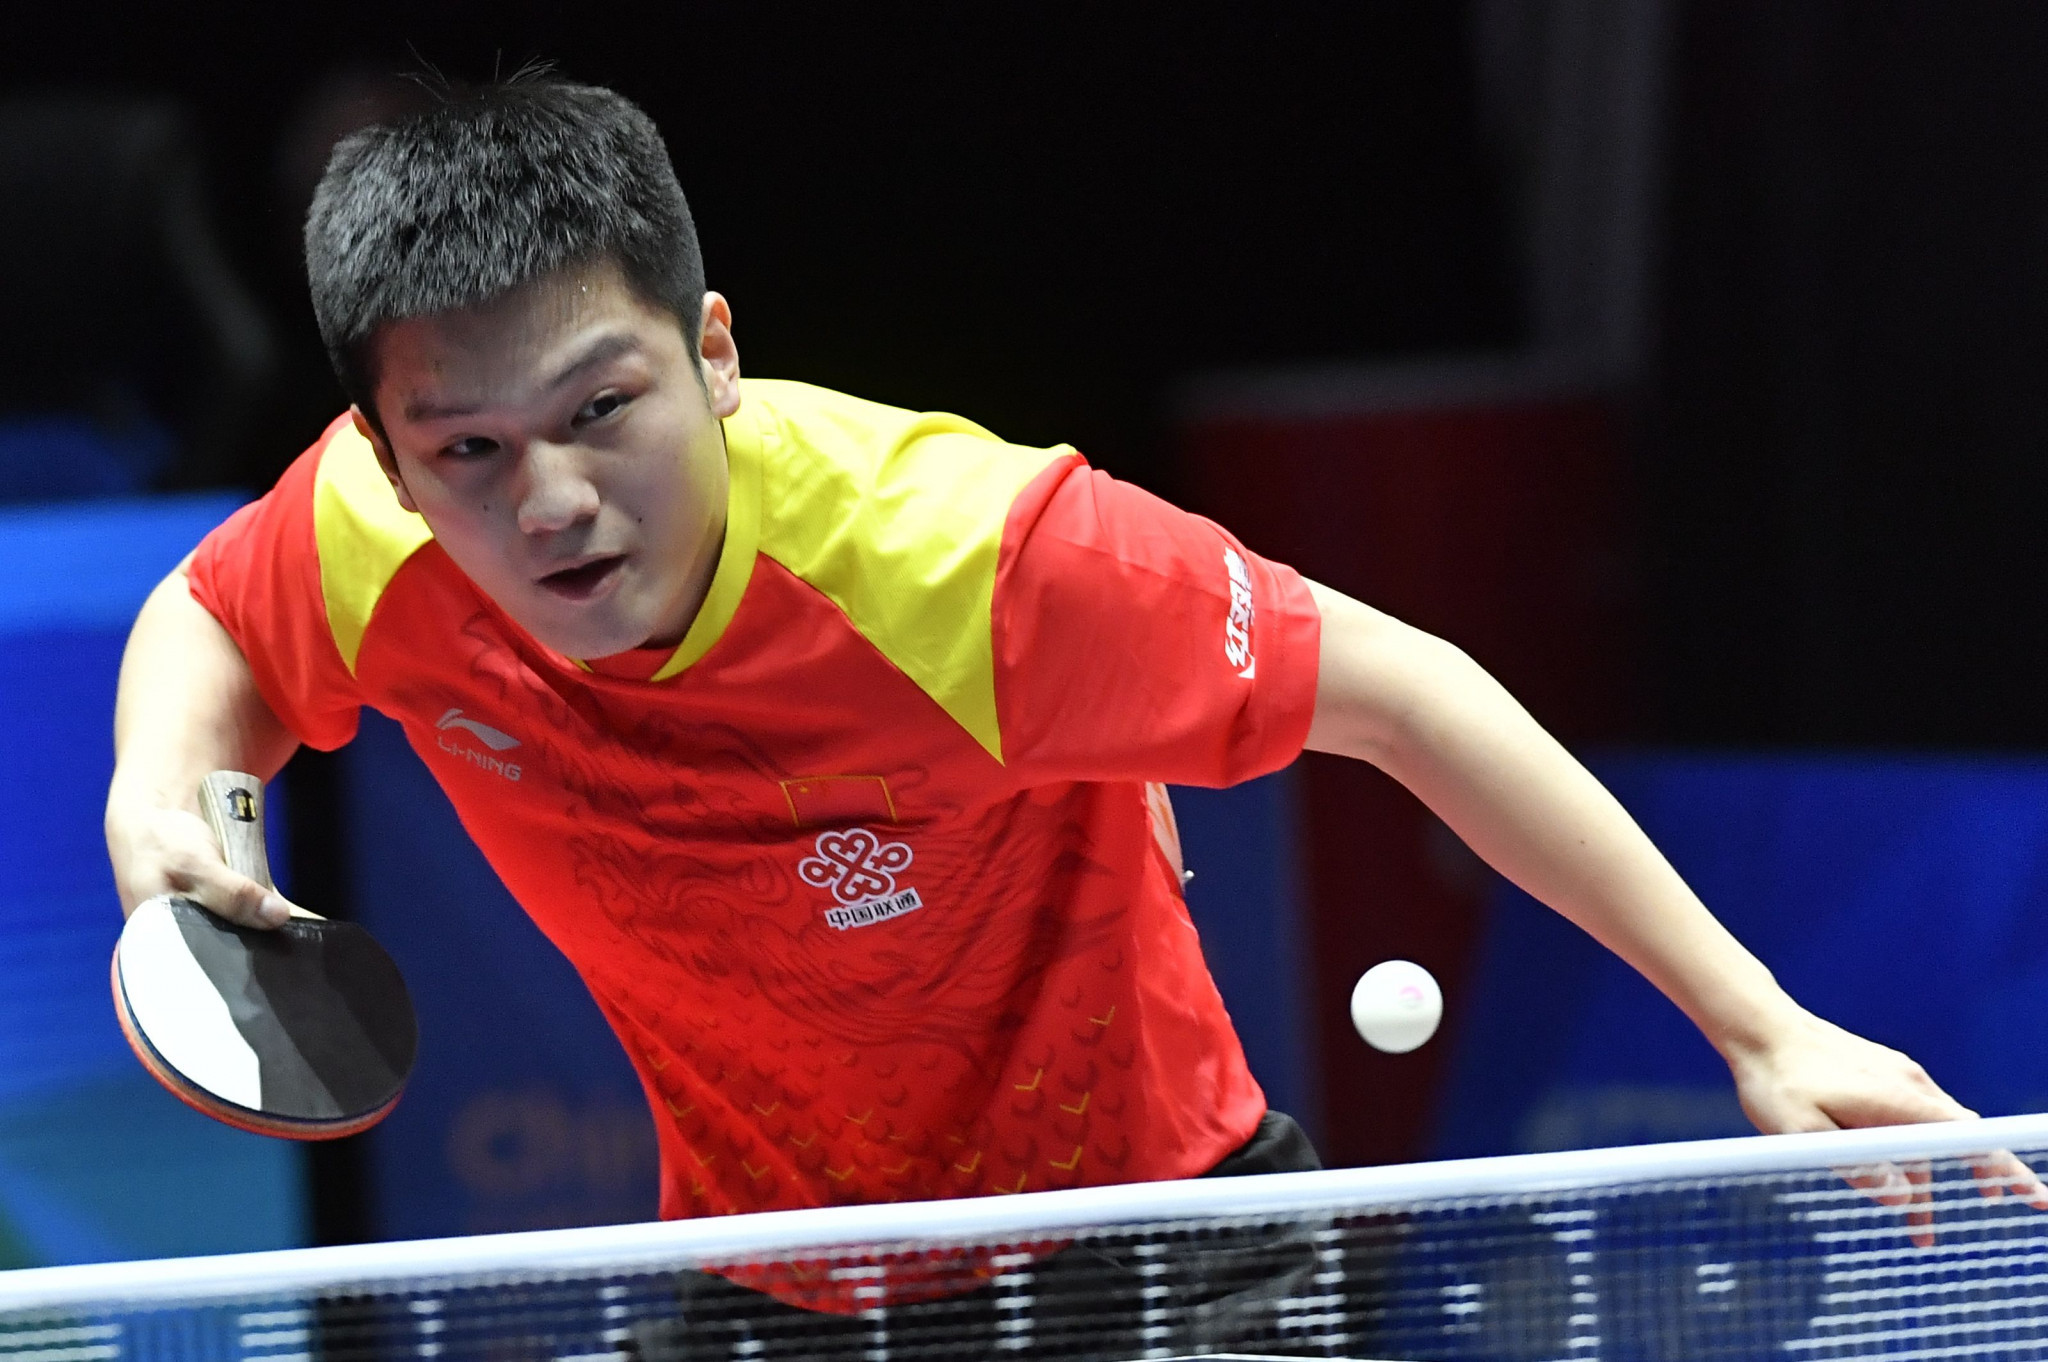 Top seed Fan Zhendong of China cruised through to the last eight of the men's tournament ©Getty Images